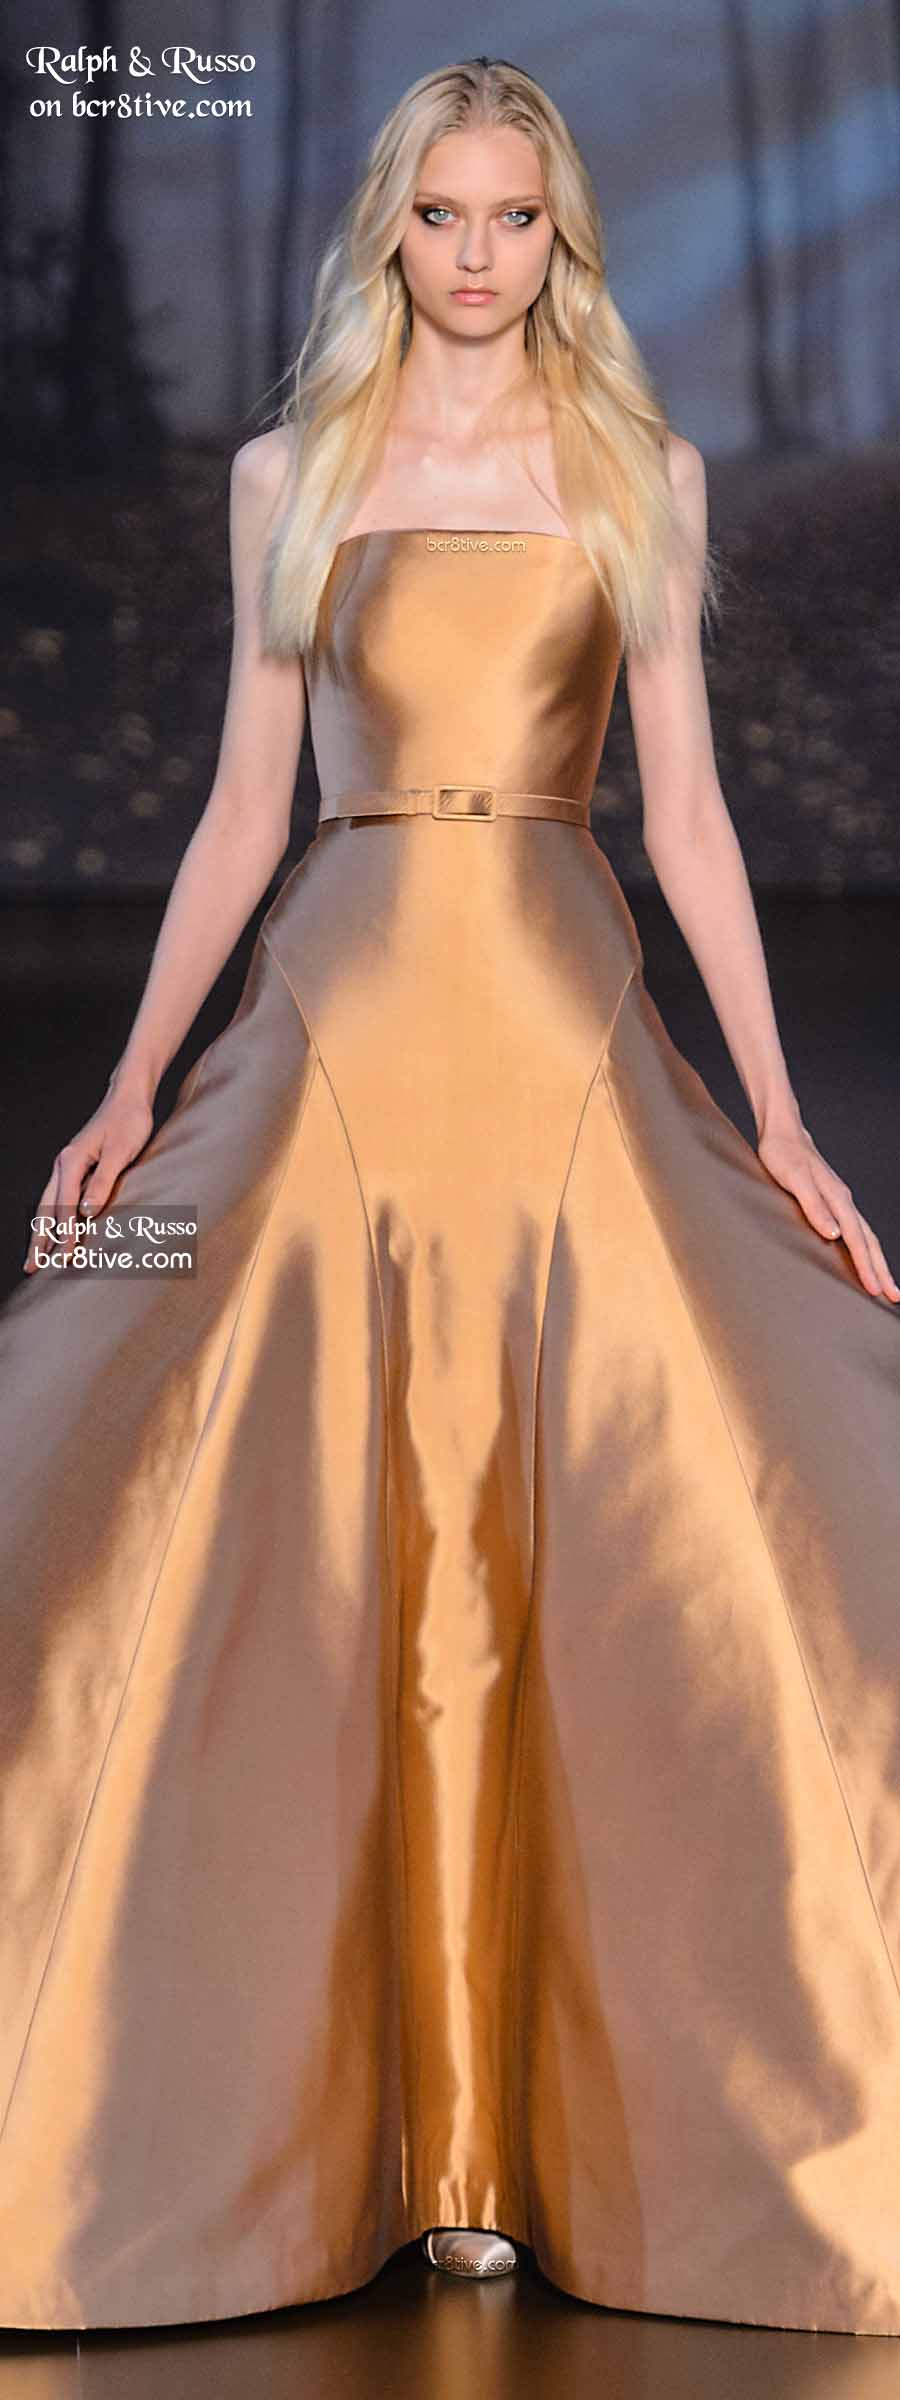 Ralph & Russo Haute Couture Fall 2015-16